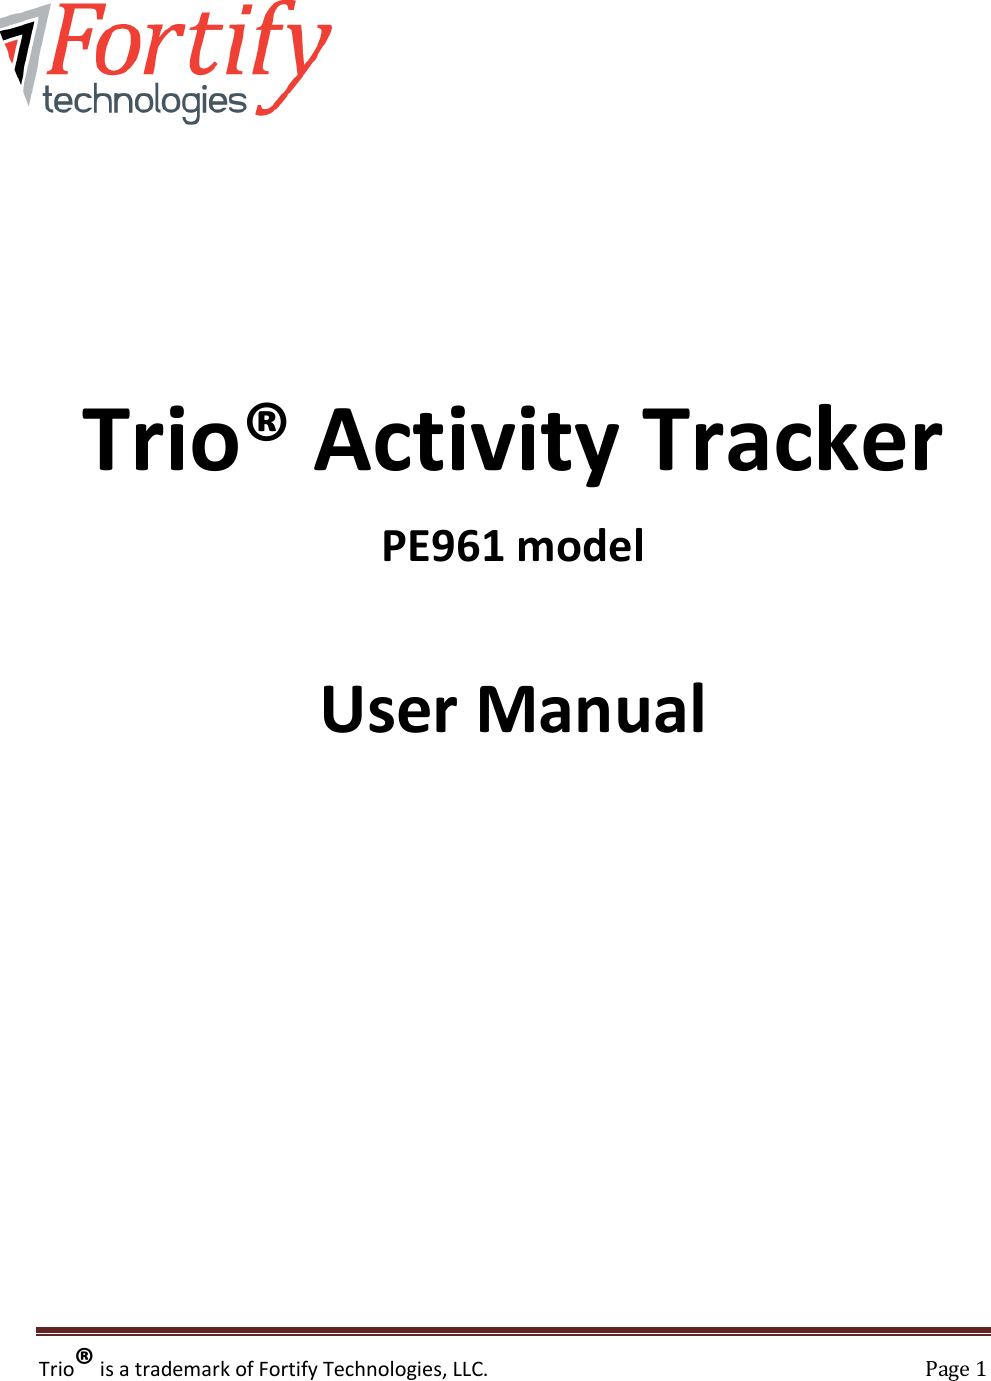 Trio® is a trademark of Fortify Technologies, LLC.    Page 1          Trio® Activity Tracker PE961 model   User Manual               